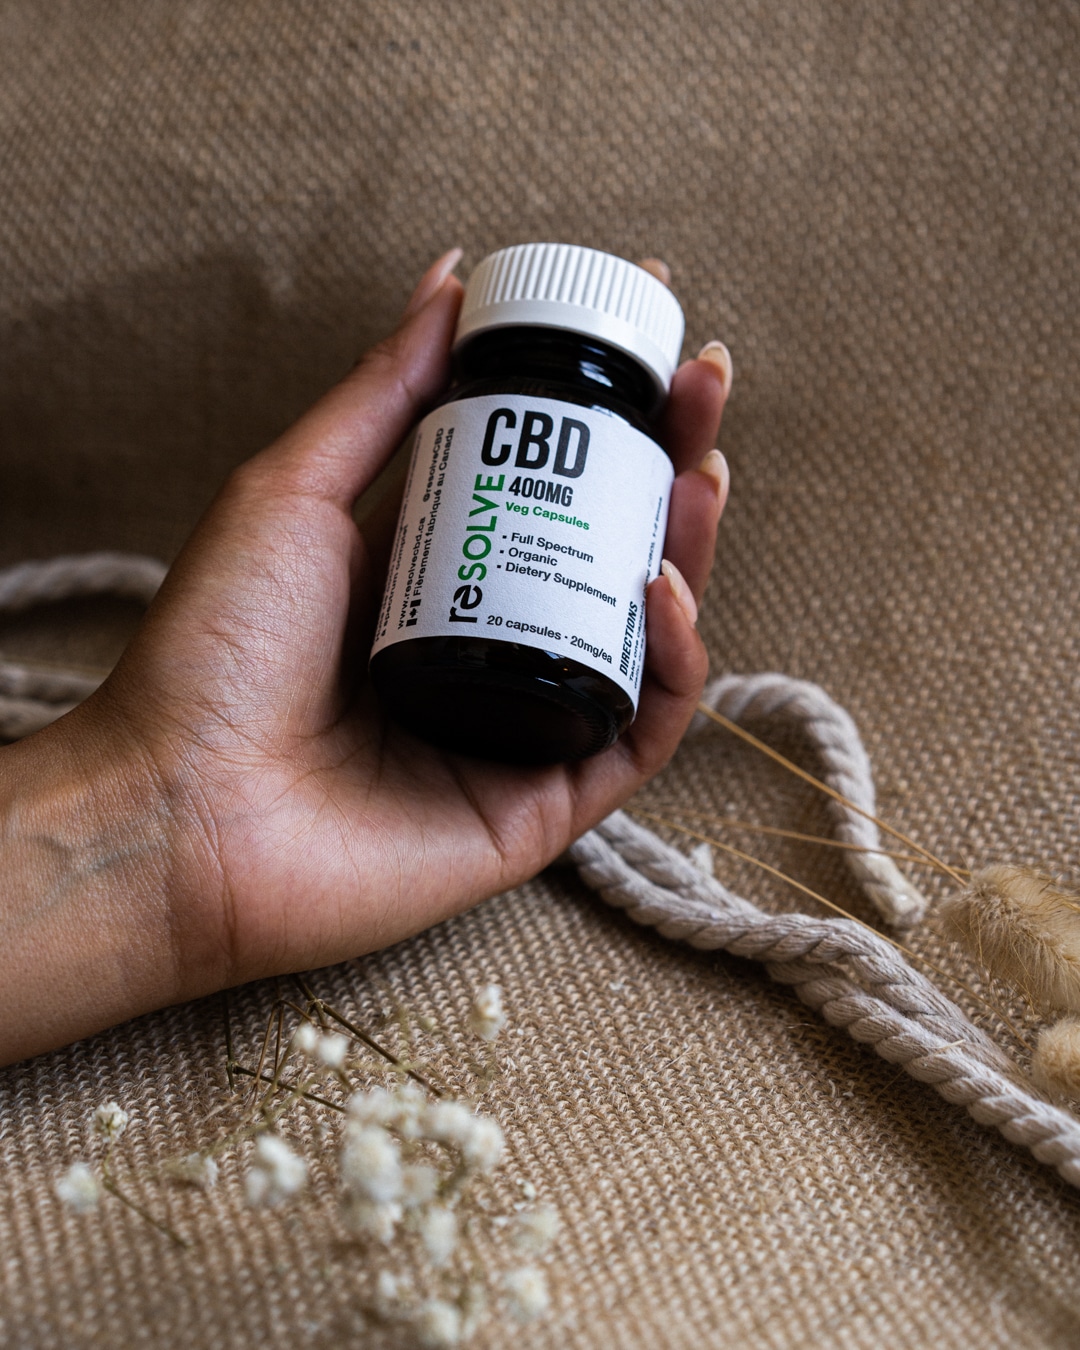 What is the difference between CBD and THC